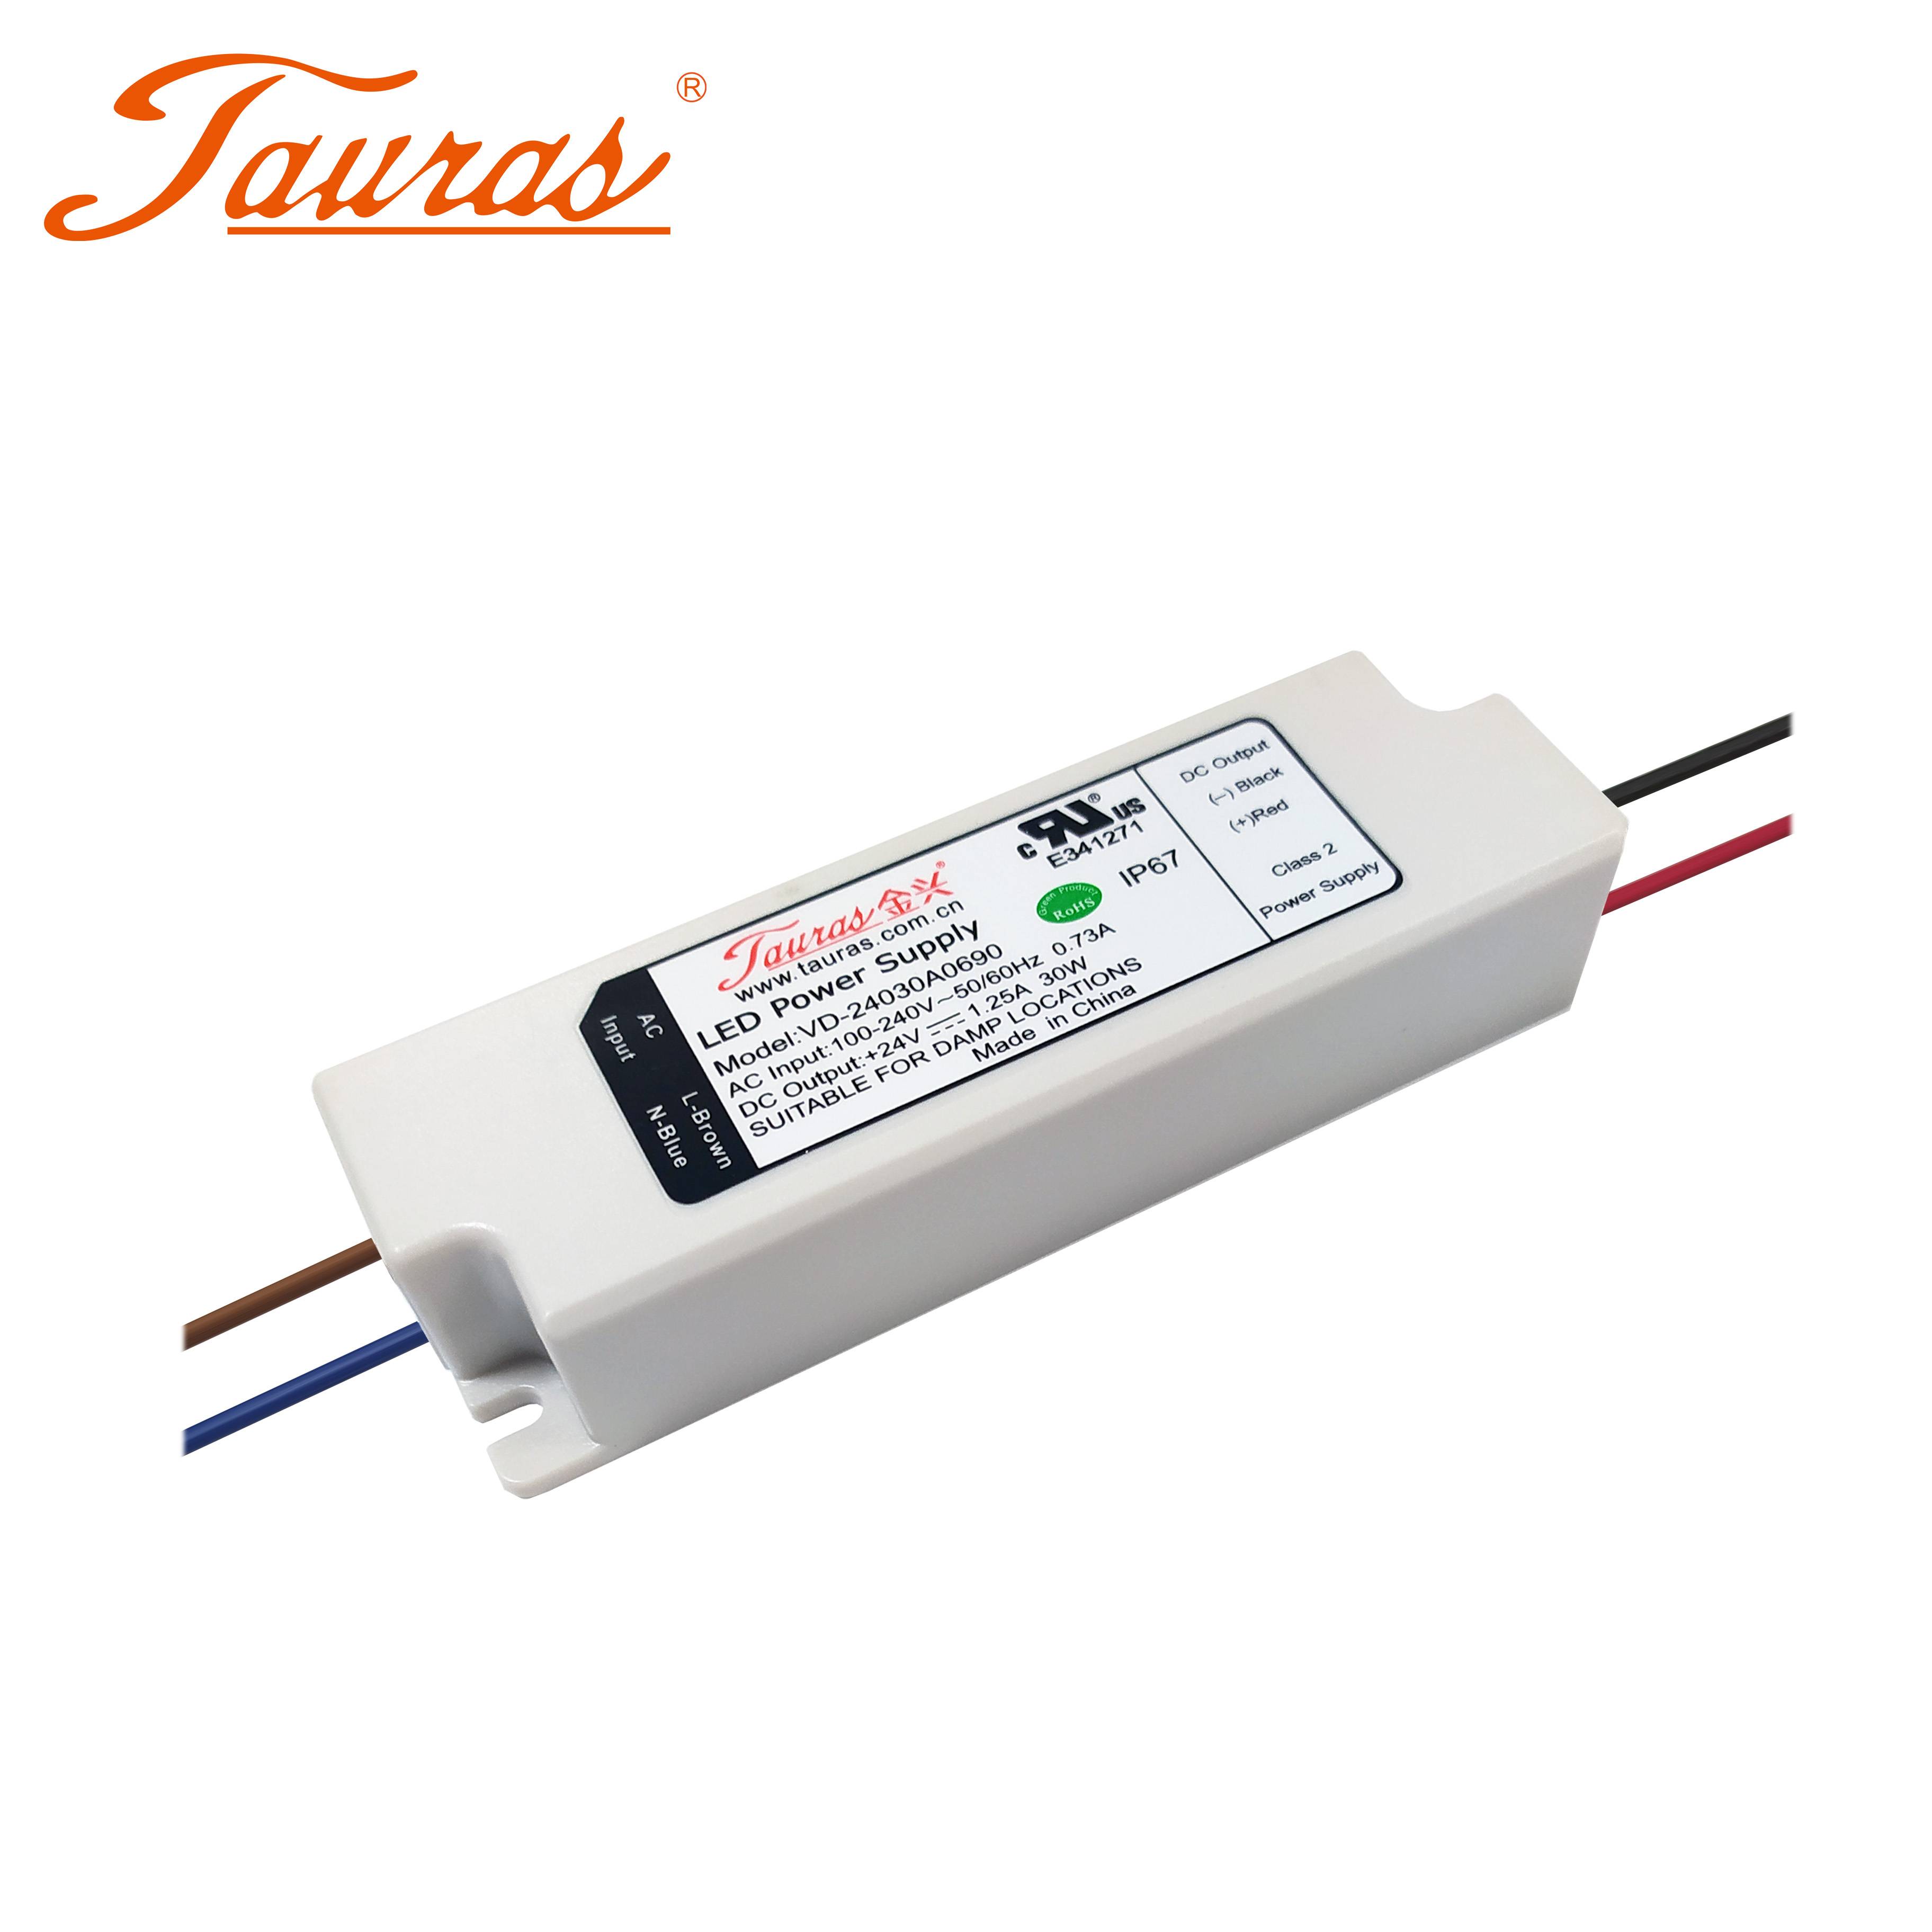 Hot-selling Led Strobe Driver - 12v 24v 2.5a 30w Constant Voltage IP67 AC to DC LED Driver – Tauras